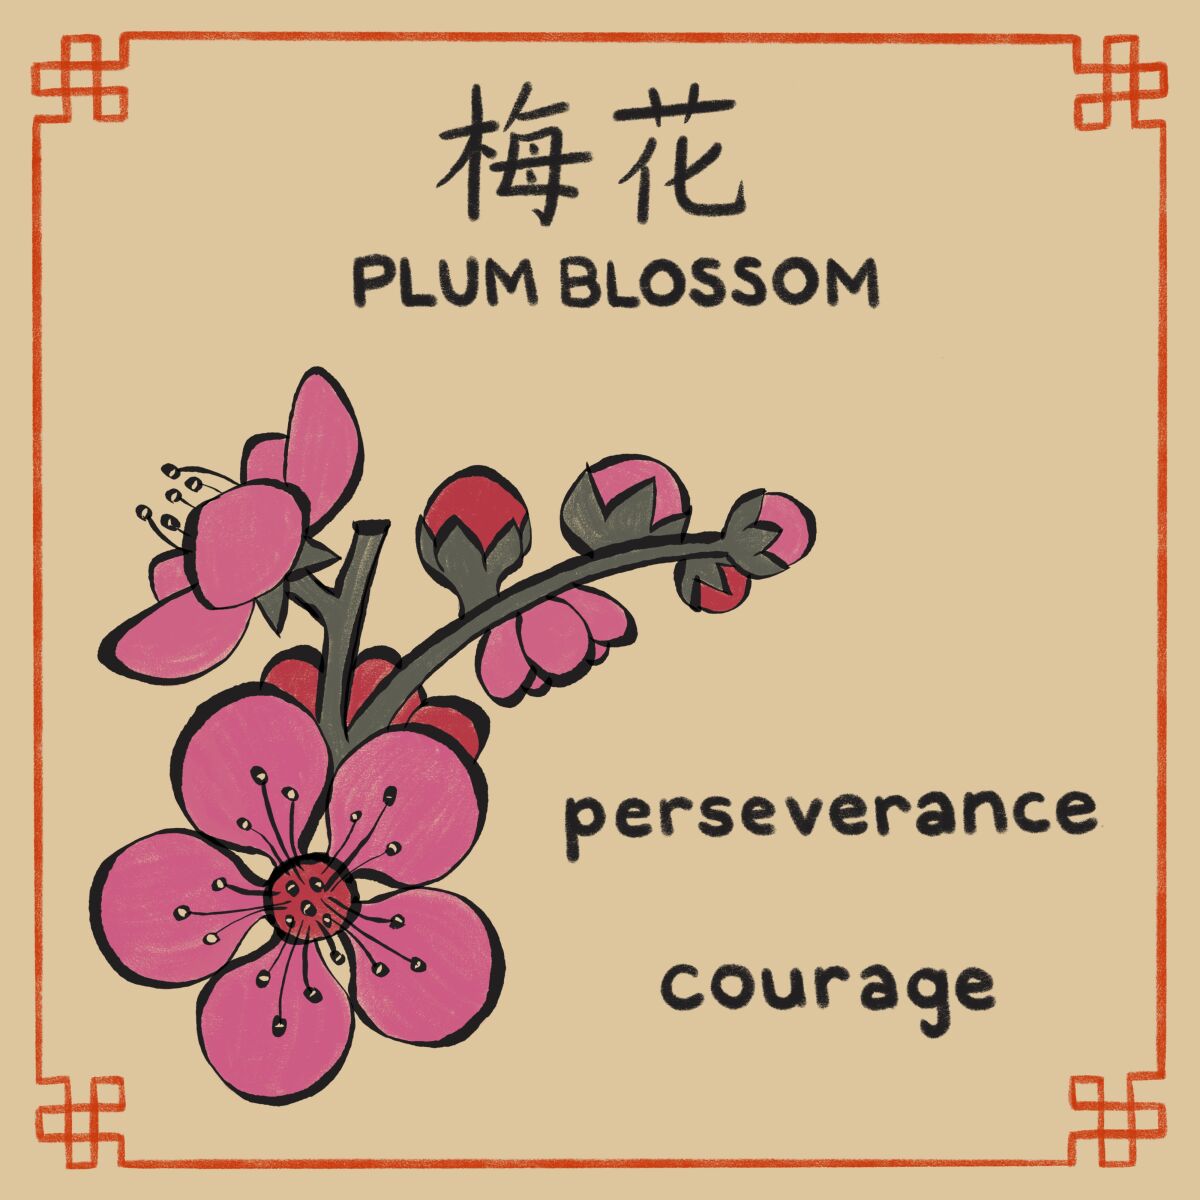 Illustration of plum blossom with the words "perseverance, courage"